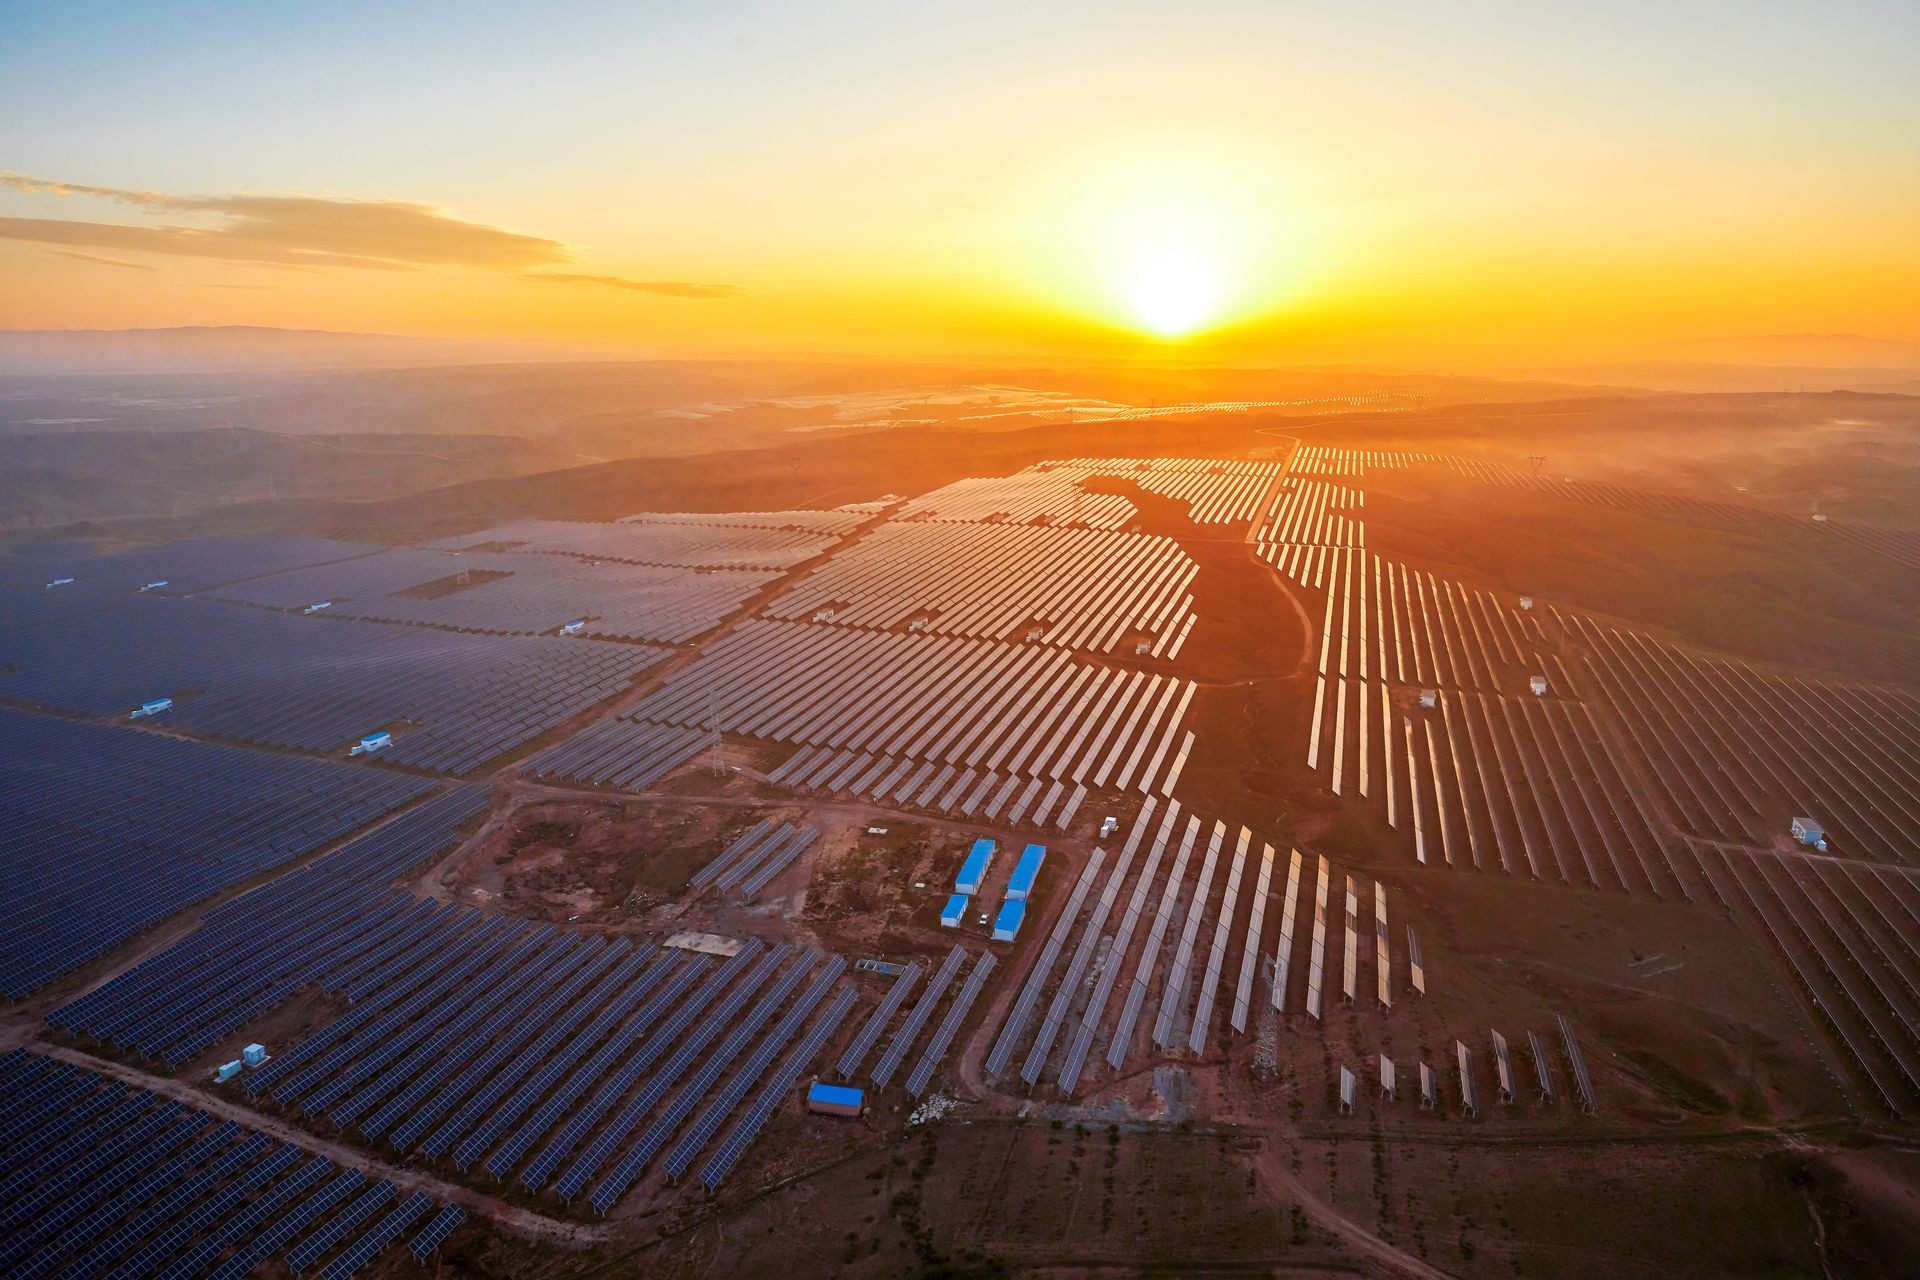 Aerial photo of new energy solar photovoltaic panels outdoors at sunrise